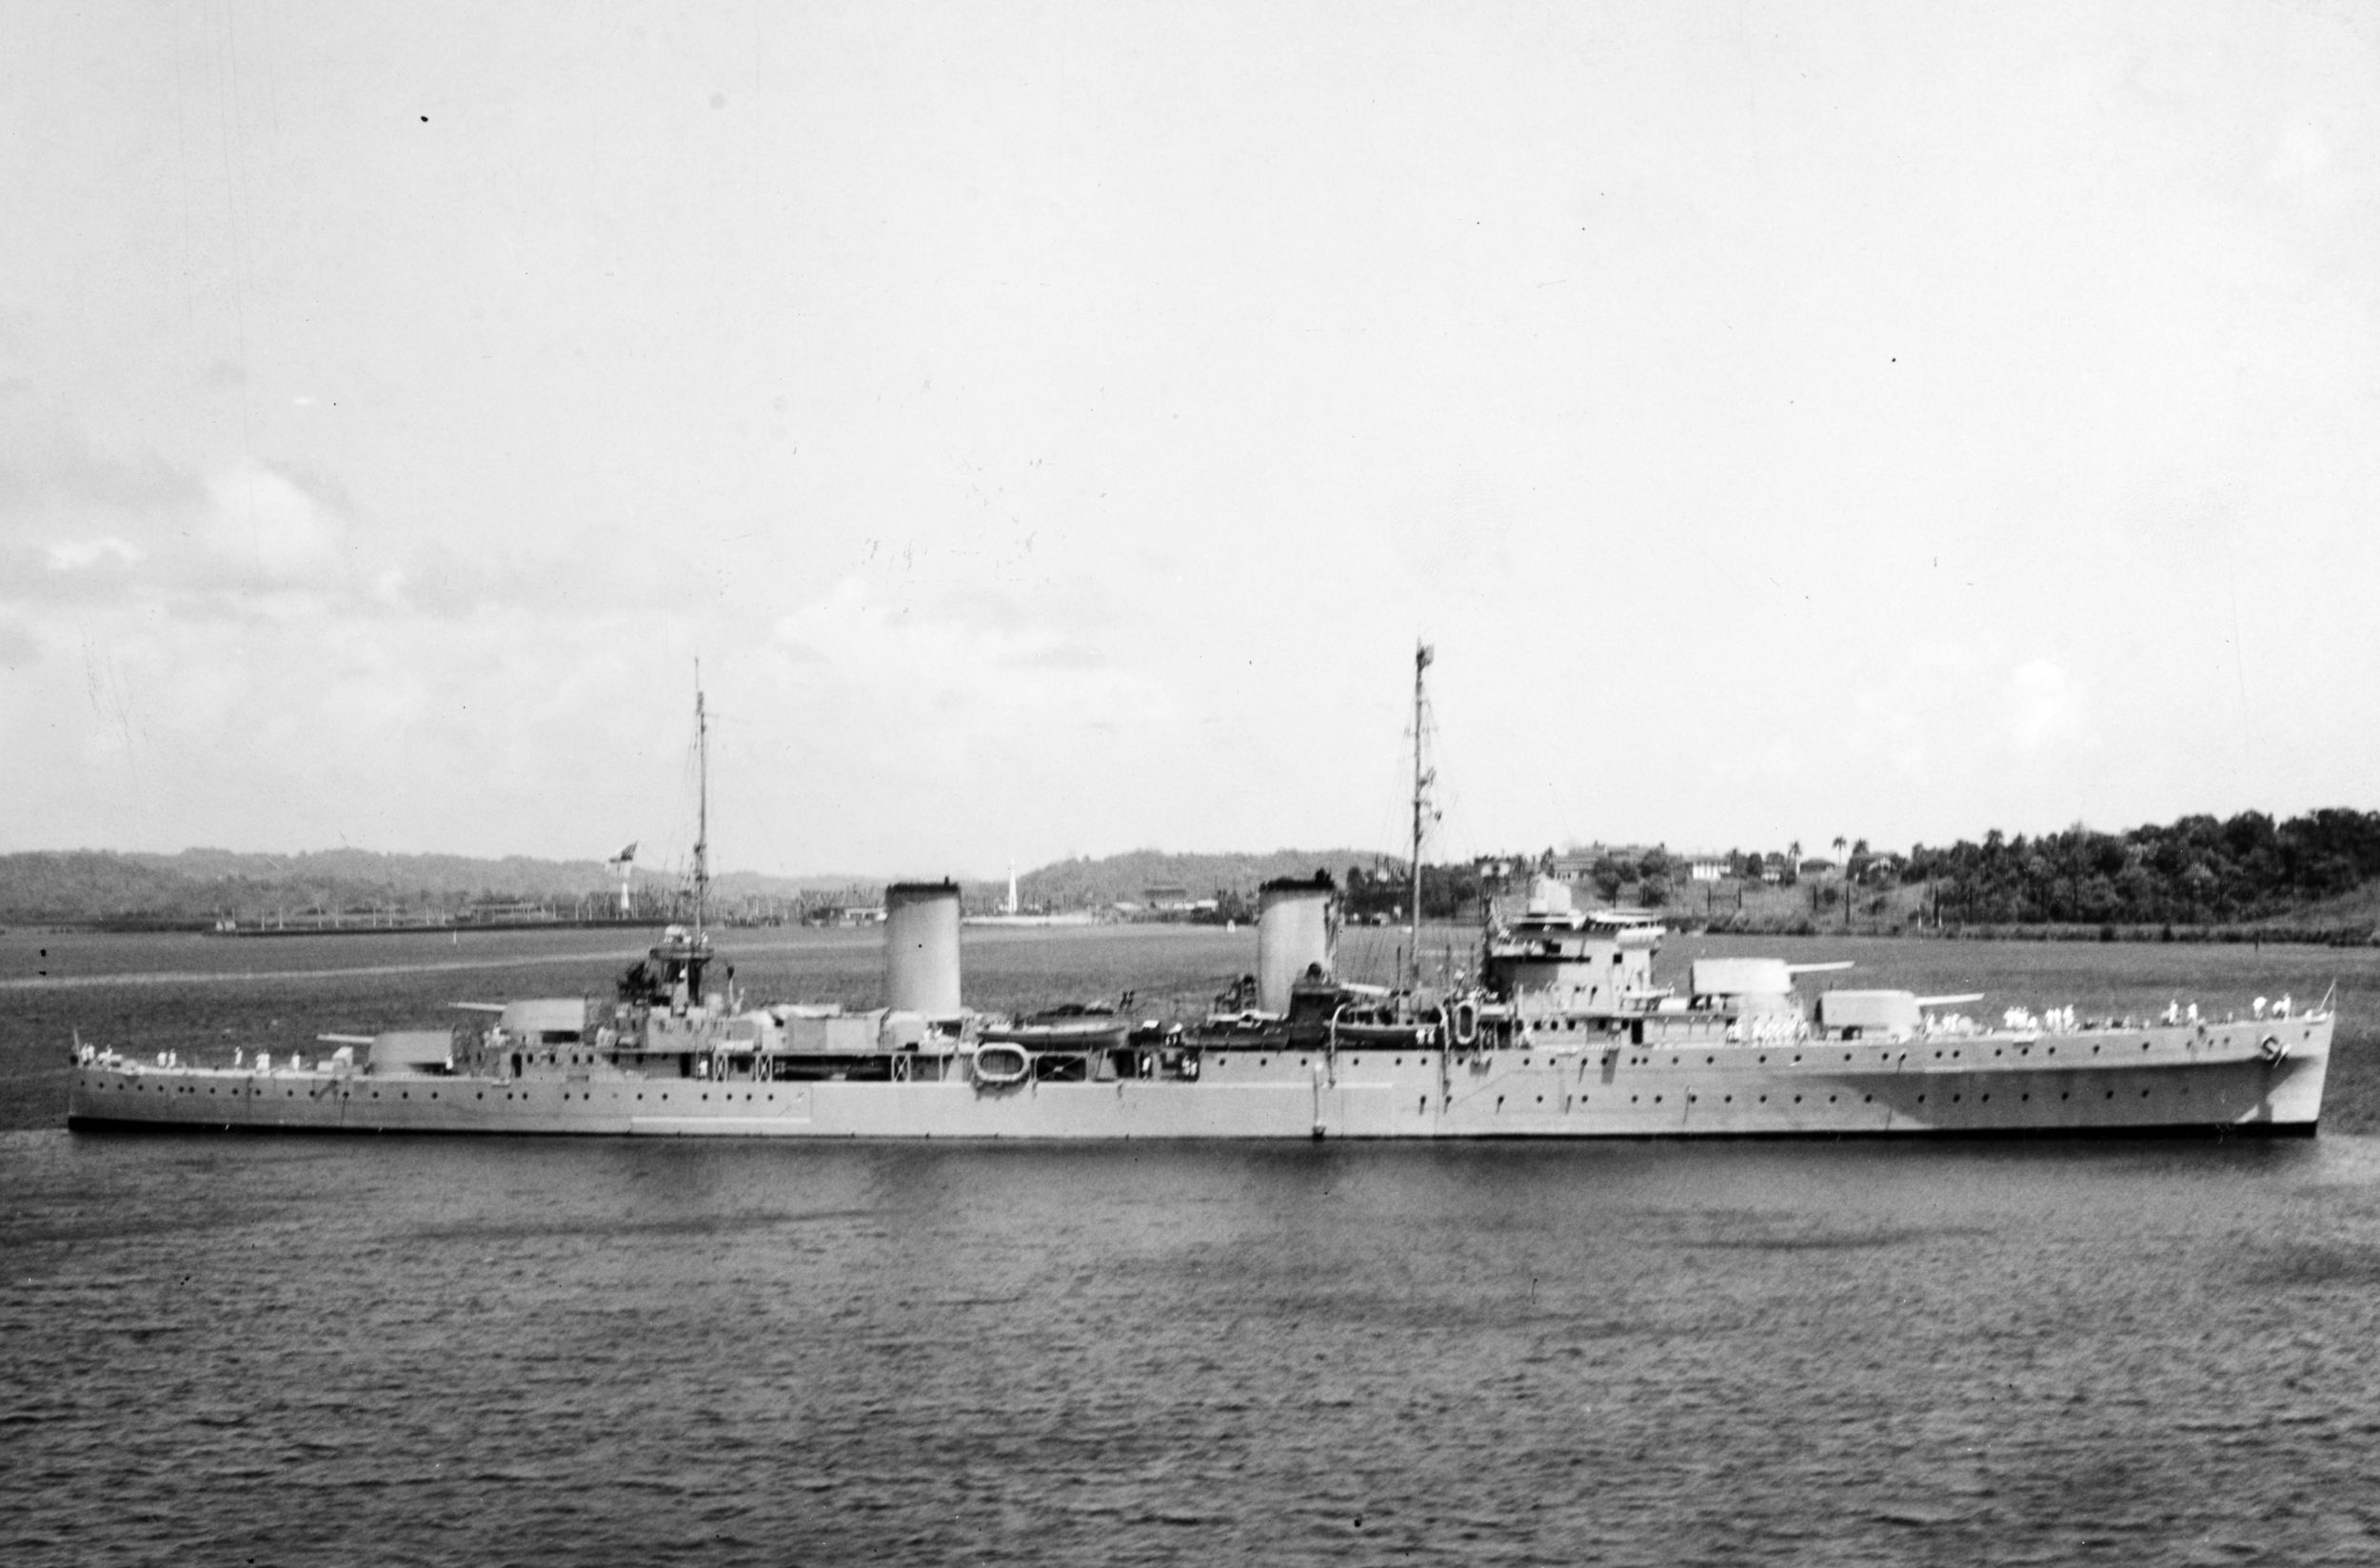 The cruiser HMAS Perth is shown at anchor during peacetime.